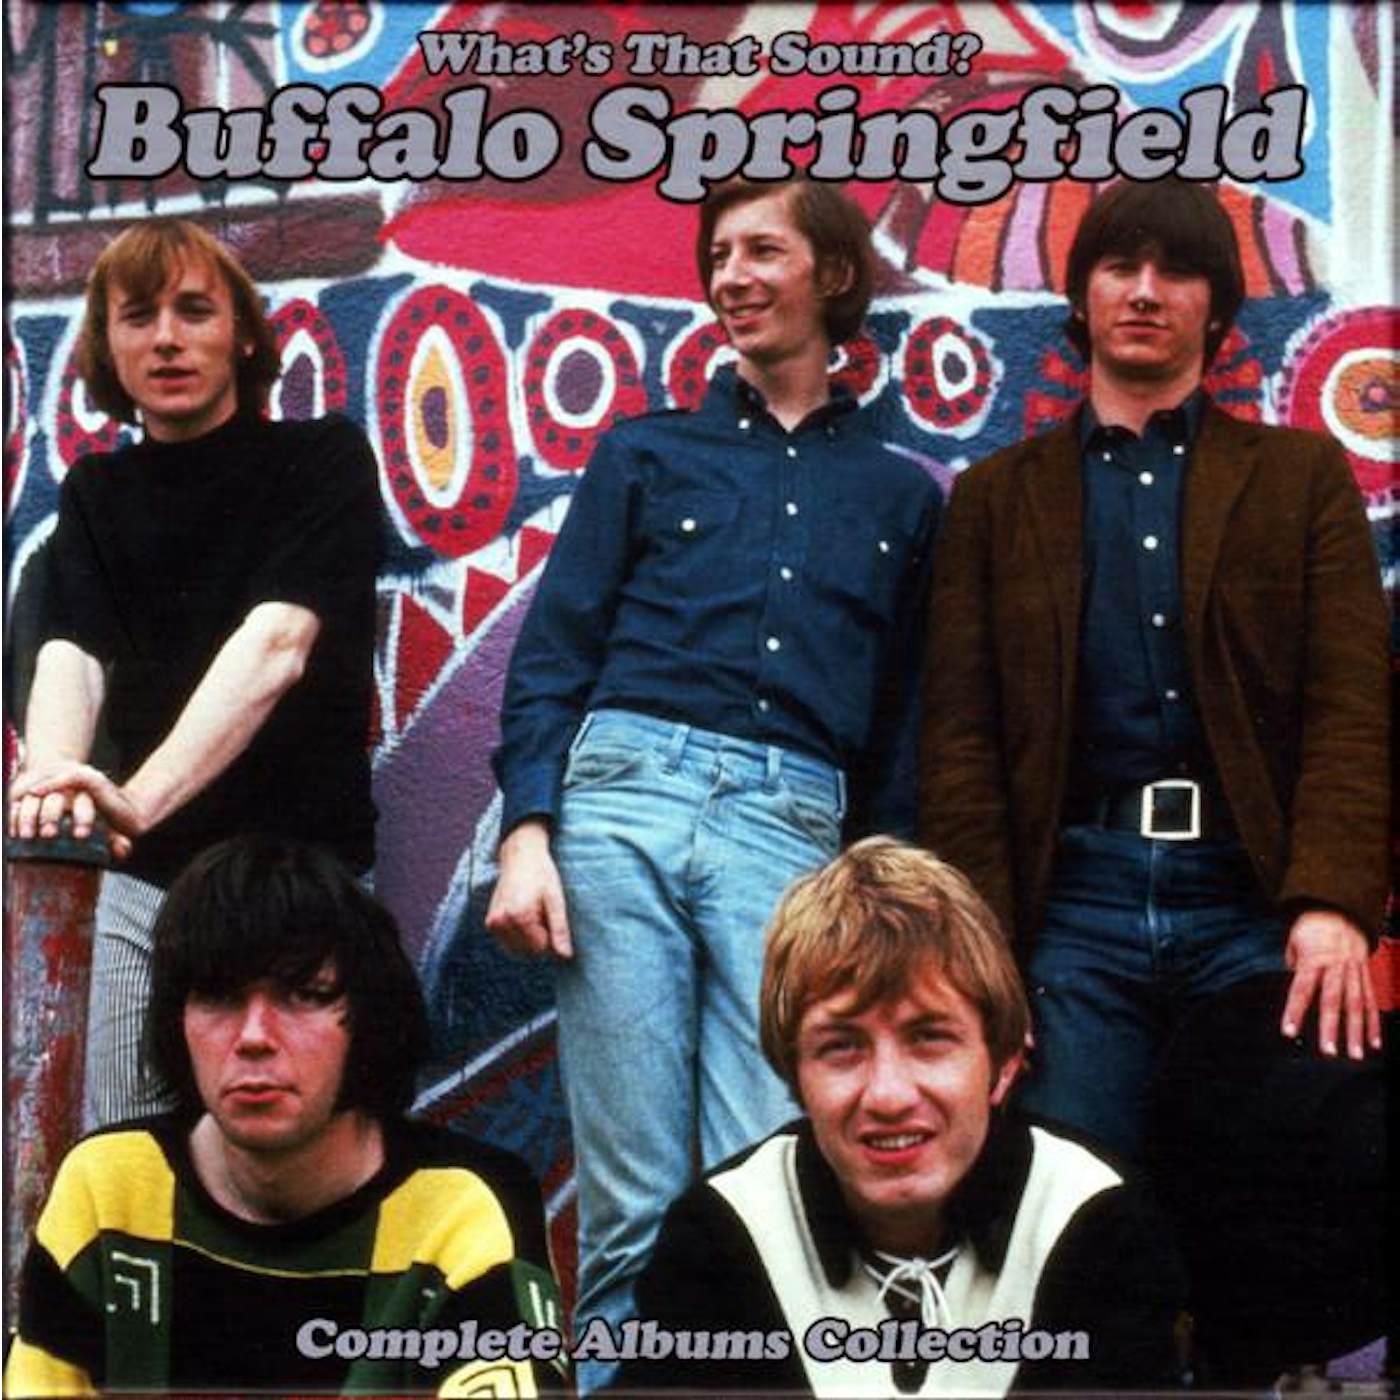 Buffalo Springfield WHAT'S THAT SOUND? COMPLETE ALBUMS COLLECTION (5CD) CD